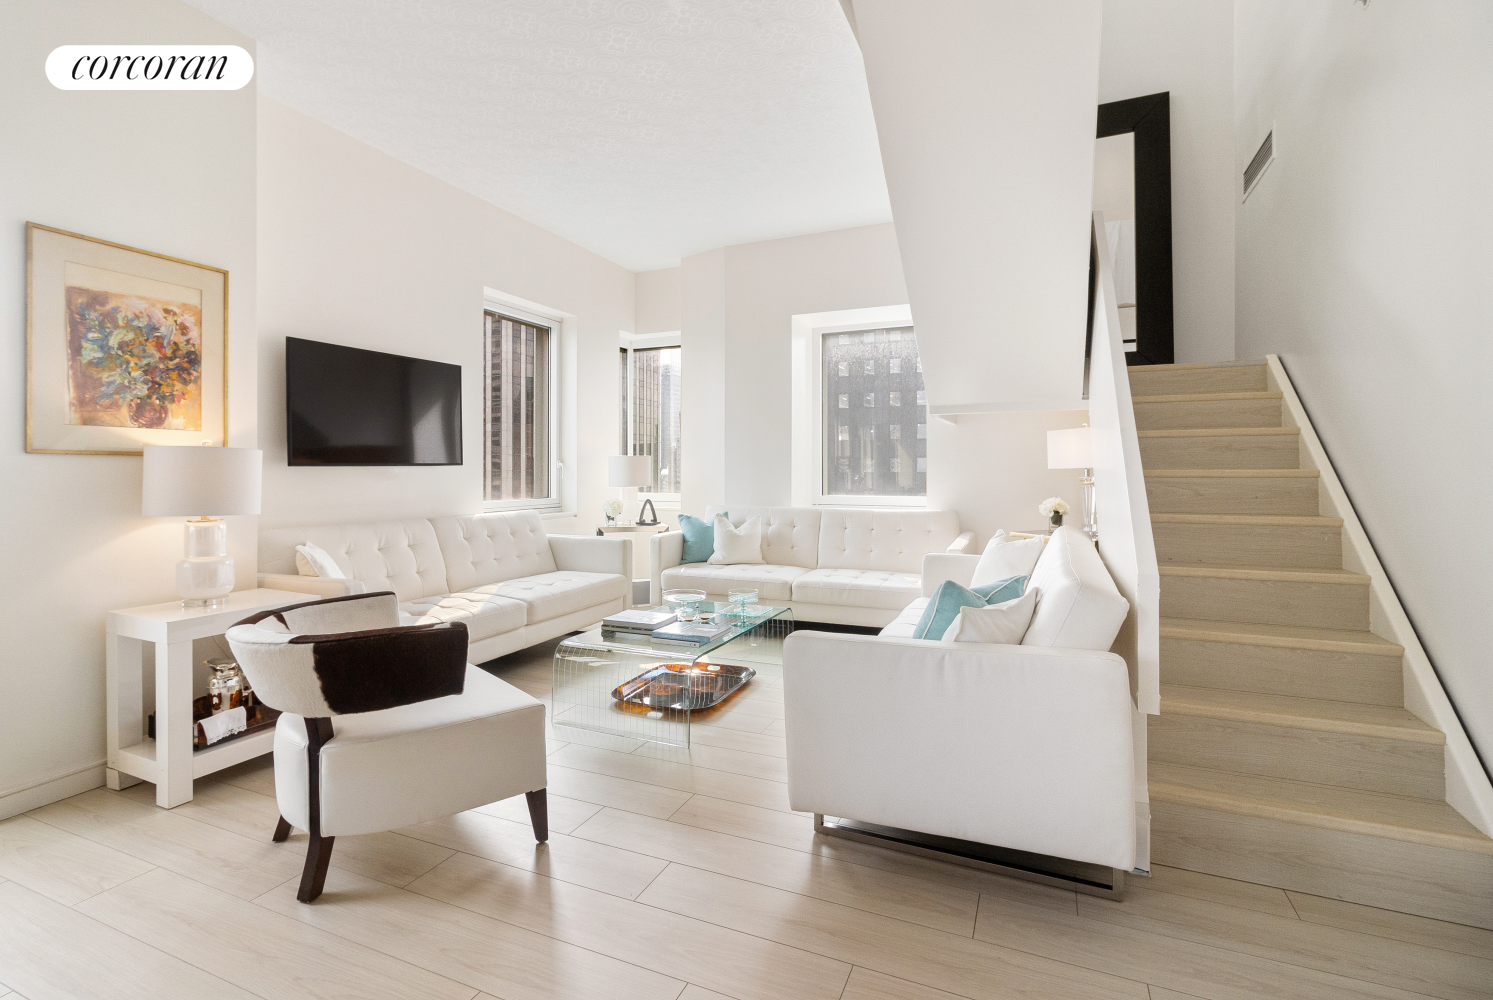 70 West 45th Street Ph3, Chelsea And Clinton, Downtown, NYC - 5 Bedrooms  
5.5 Bathrooms  
12 Rooms - 